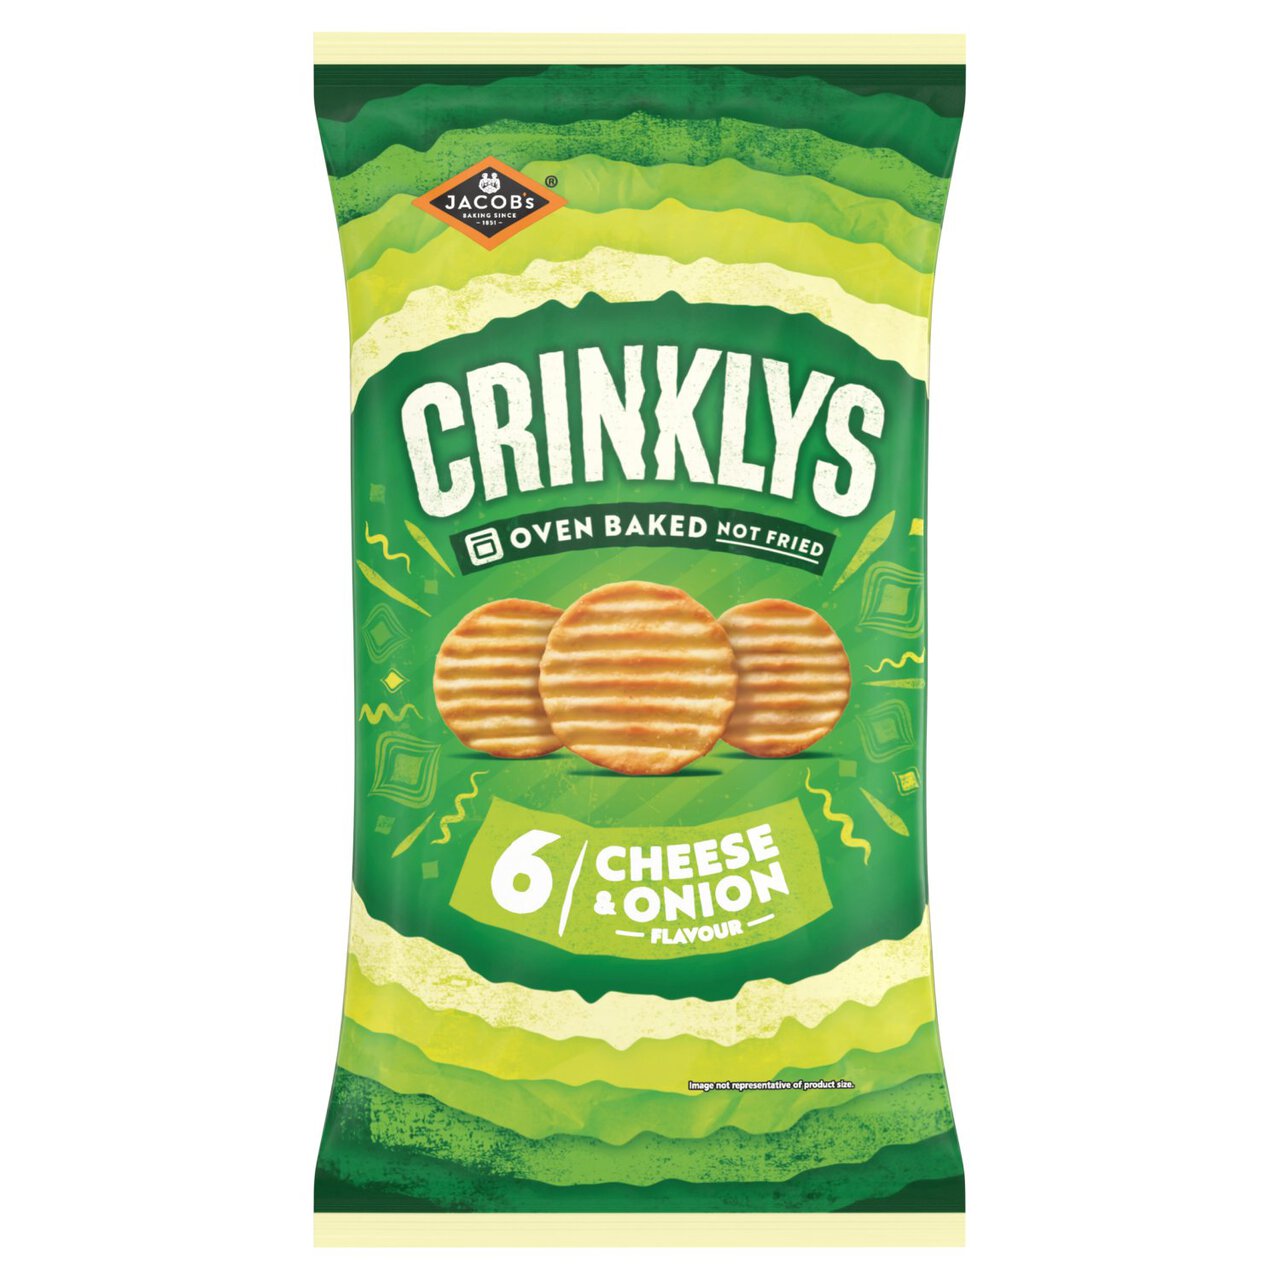 Jacob's Crinklys Cheese & Onion 6 per pack